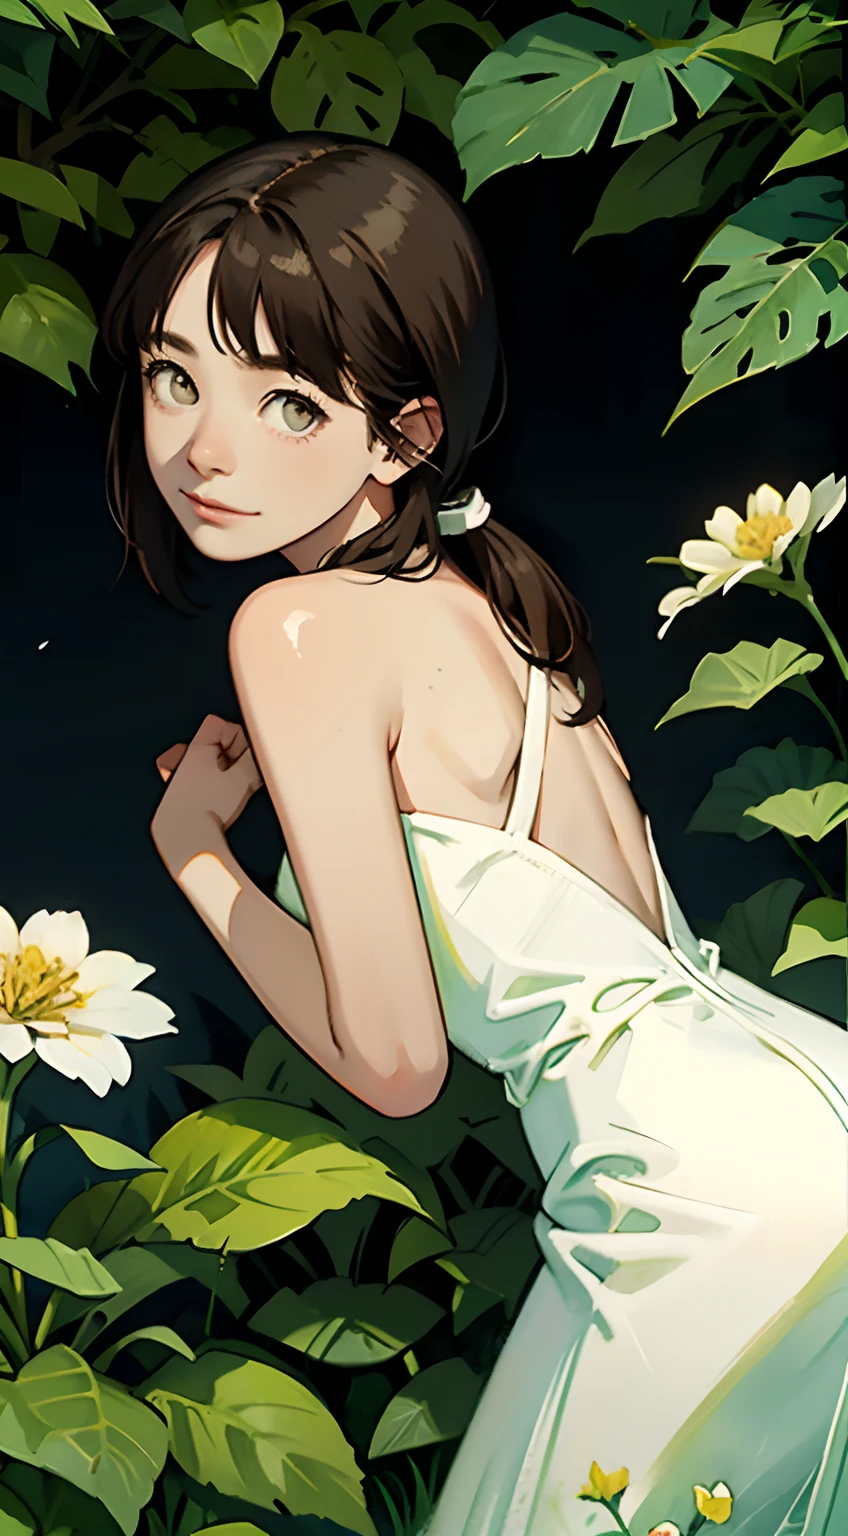 （hyper HD），（ ultra - detailed),beautiful  flowers,berries,fern,Foliage,Watercolor pattern in calm colors),(Watercolor texture),  （The background is surrounded by flowers in the jungle），（girl with fair skin），（Gentle girl），（white dresses），（Brown eyes, Brown hair）、（With a ponytail），（Look back and smile）